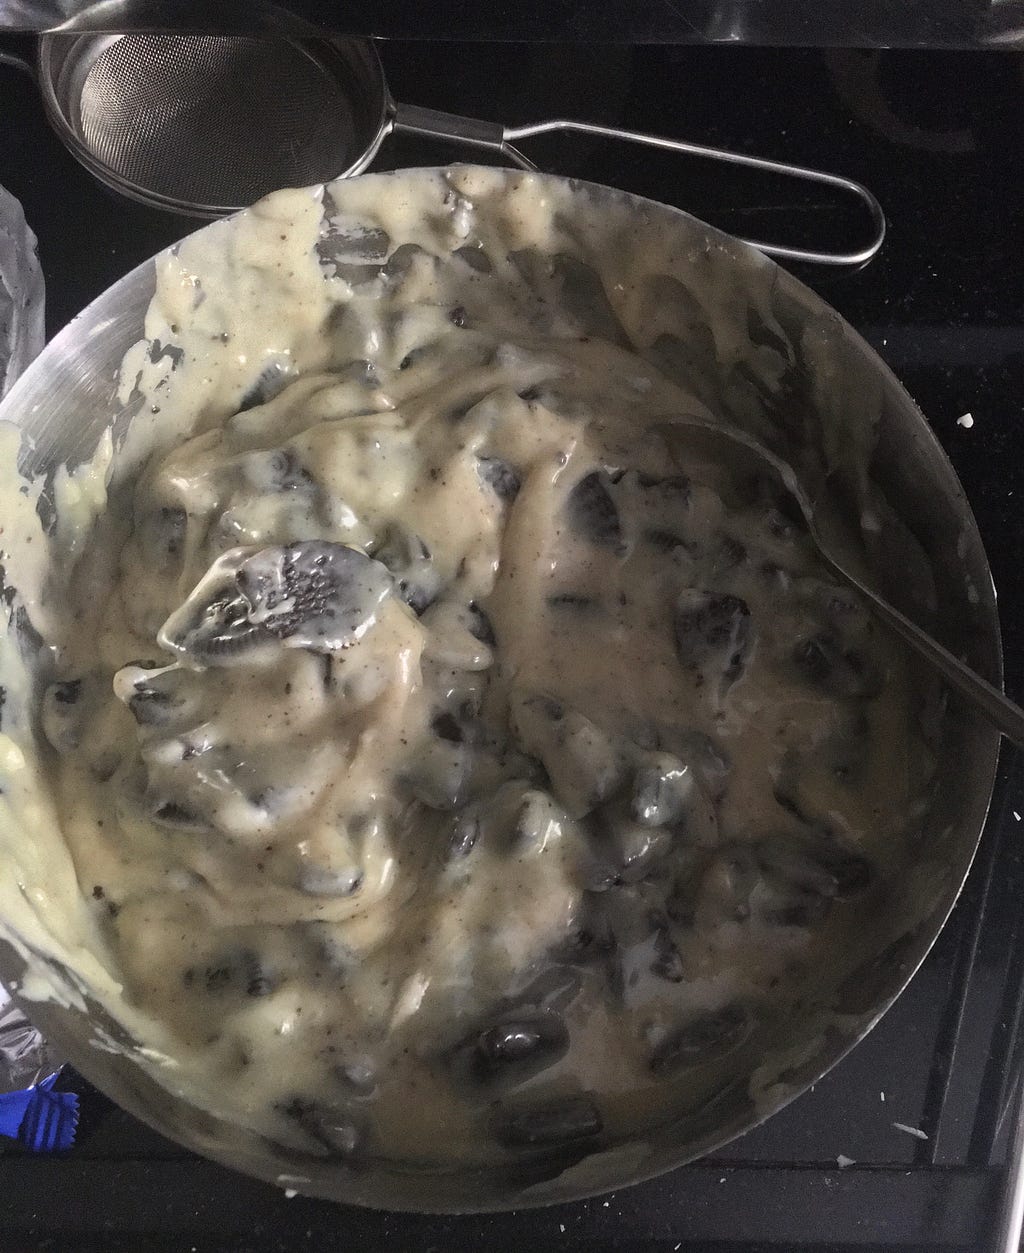 Heated Mixture of Milky Bar and Condensed Milk added to Crushed Oreo Cookies